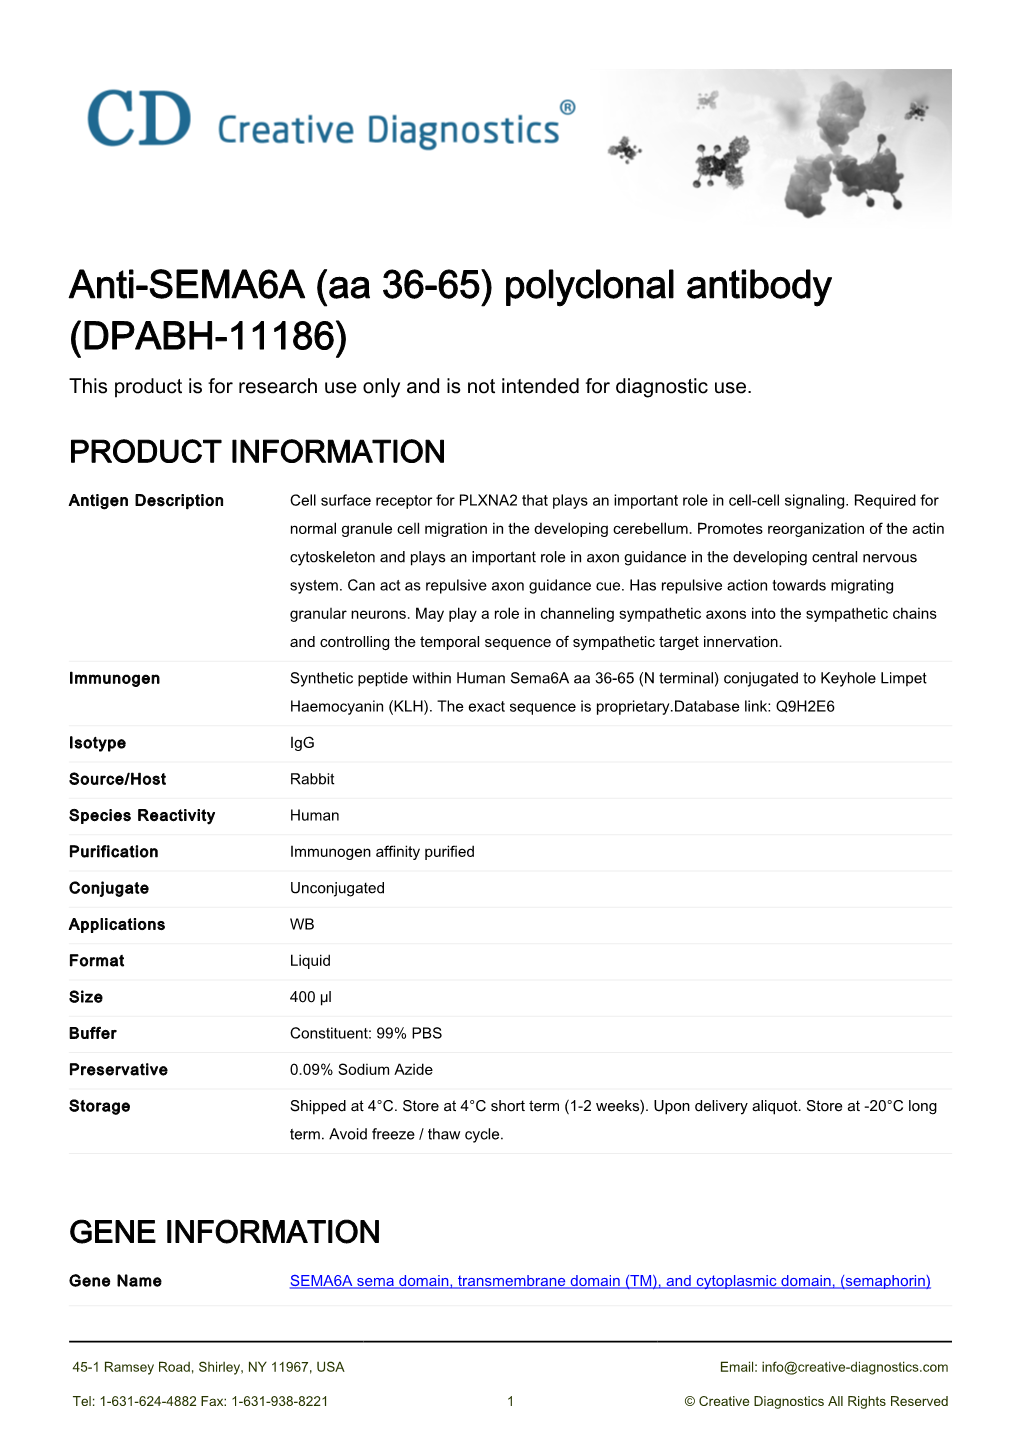 Anti-SEMA6A (Aa 36-65) Polyclonal Antibody (DPABH-11186) This Product Is for Research Use Only and Is Not Intended for Diagnostic Use